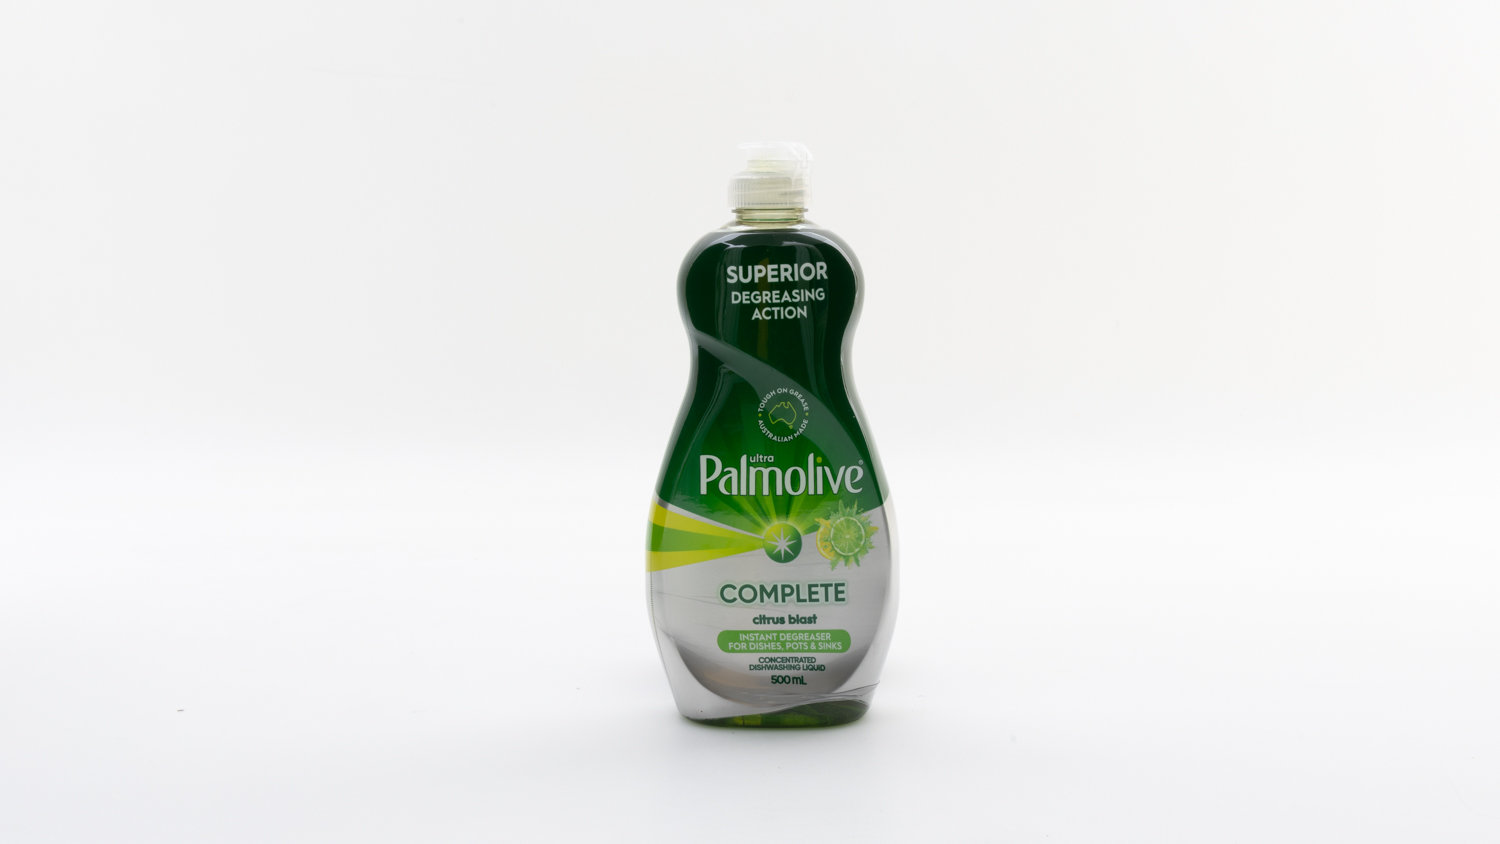 Palmolive Ultra Complete Concentrated Dishwashing Liquid carousel image